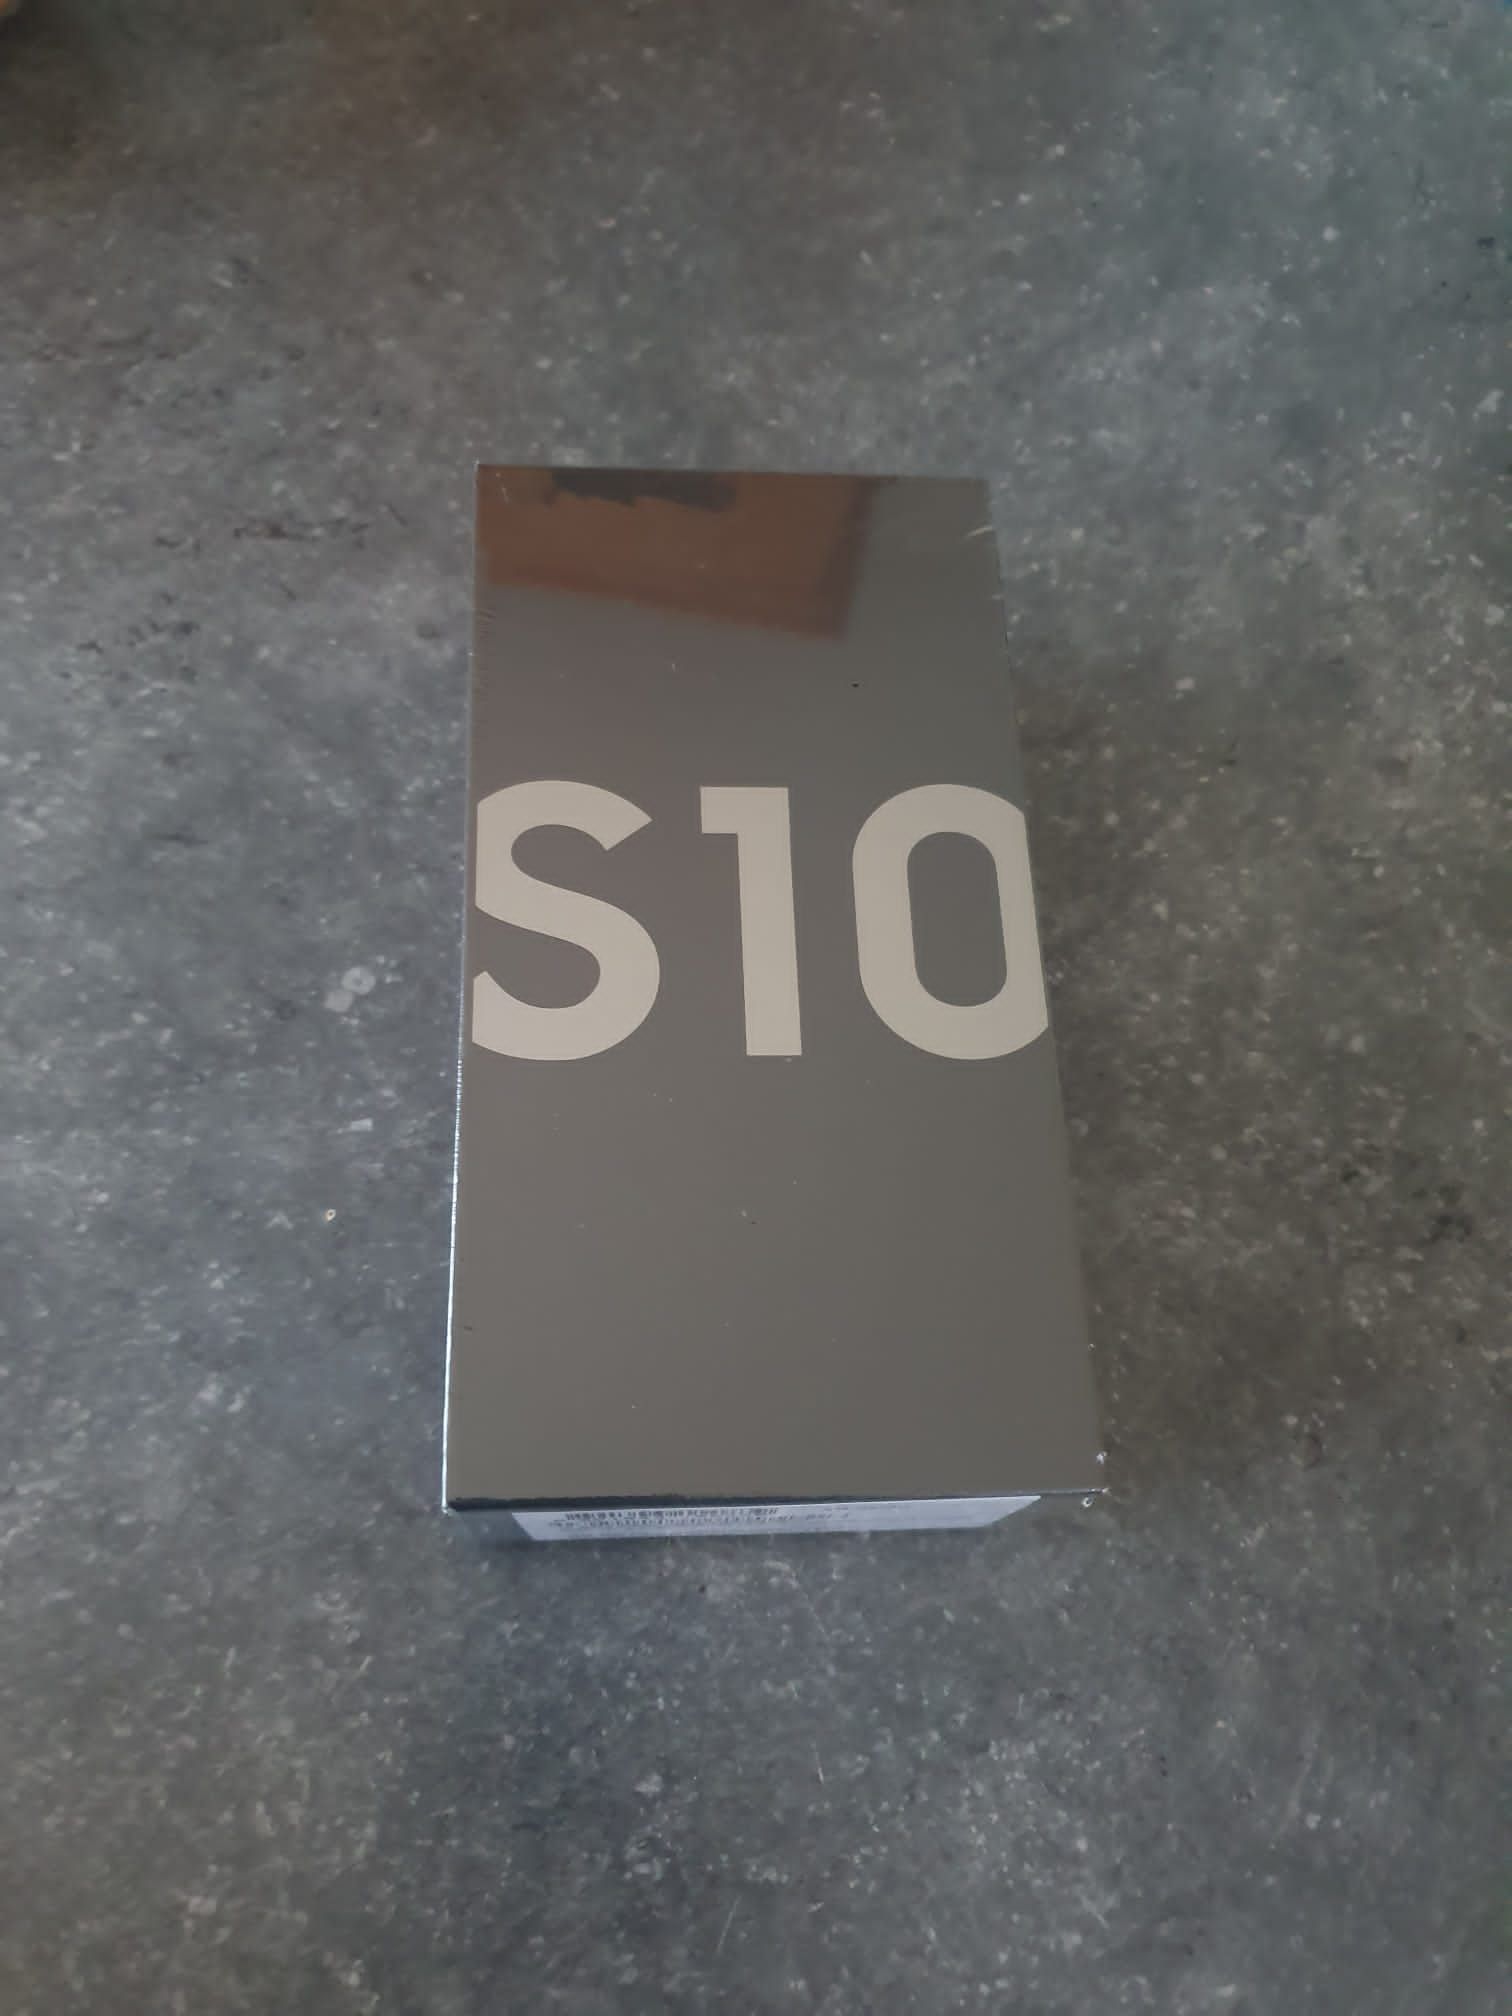 Is my new S10 a fake copy? - Samsung Community